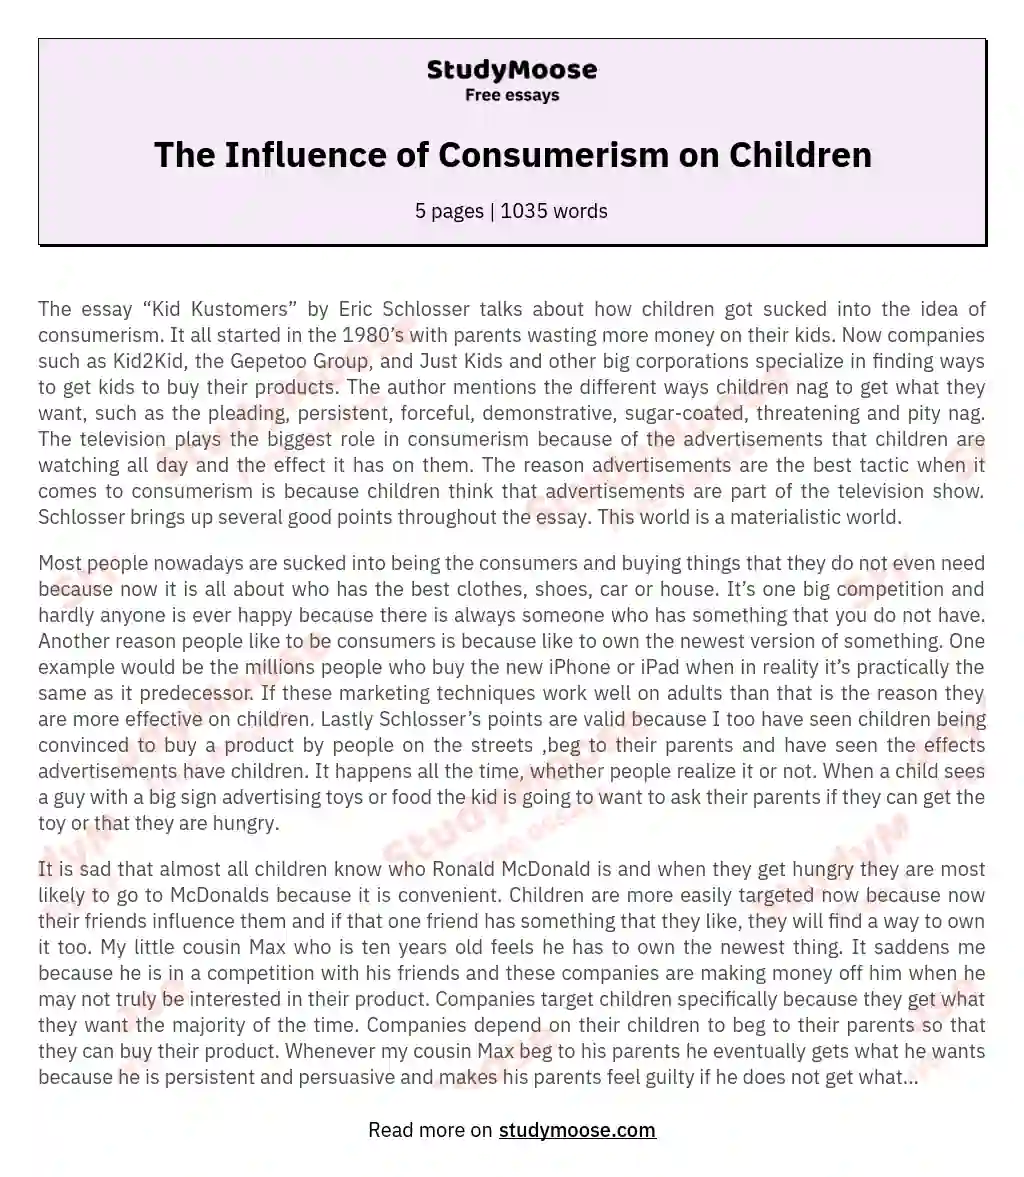 The Influence of Consumerism on Children essay